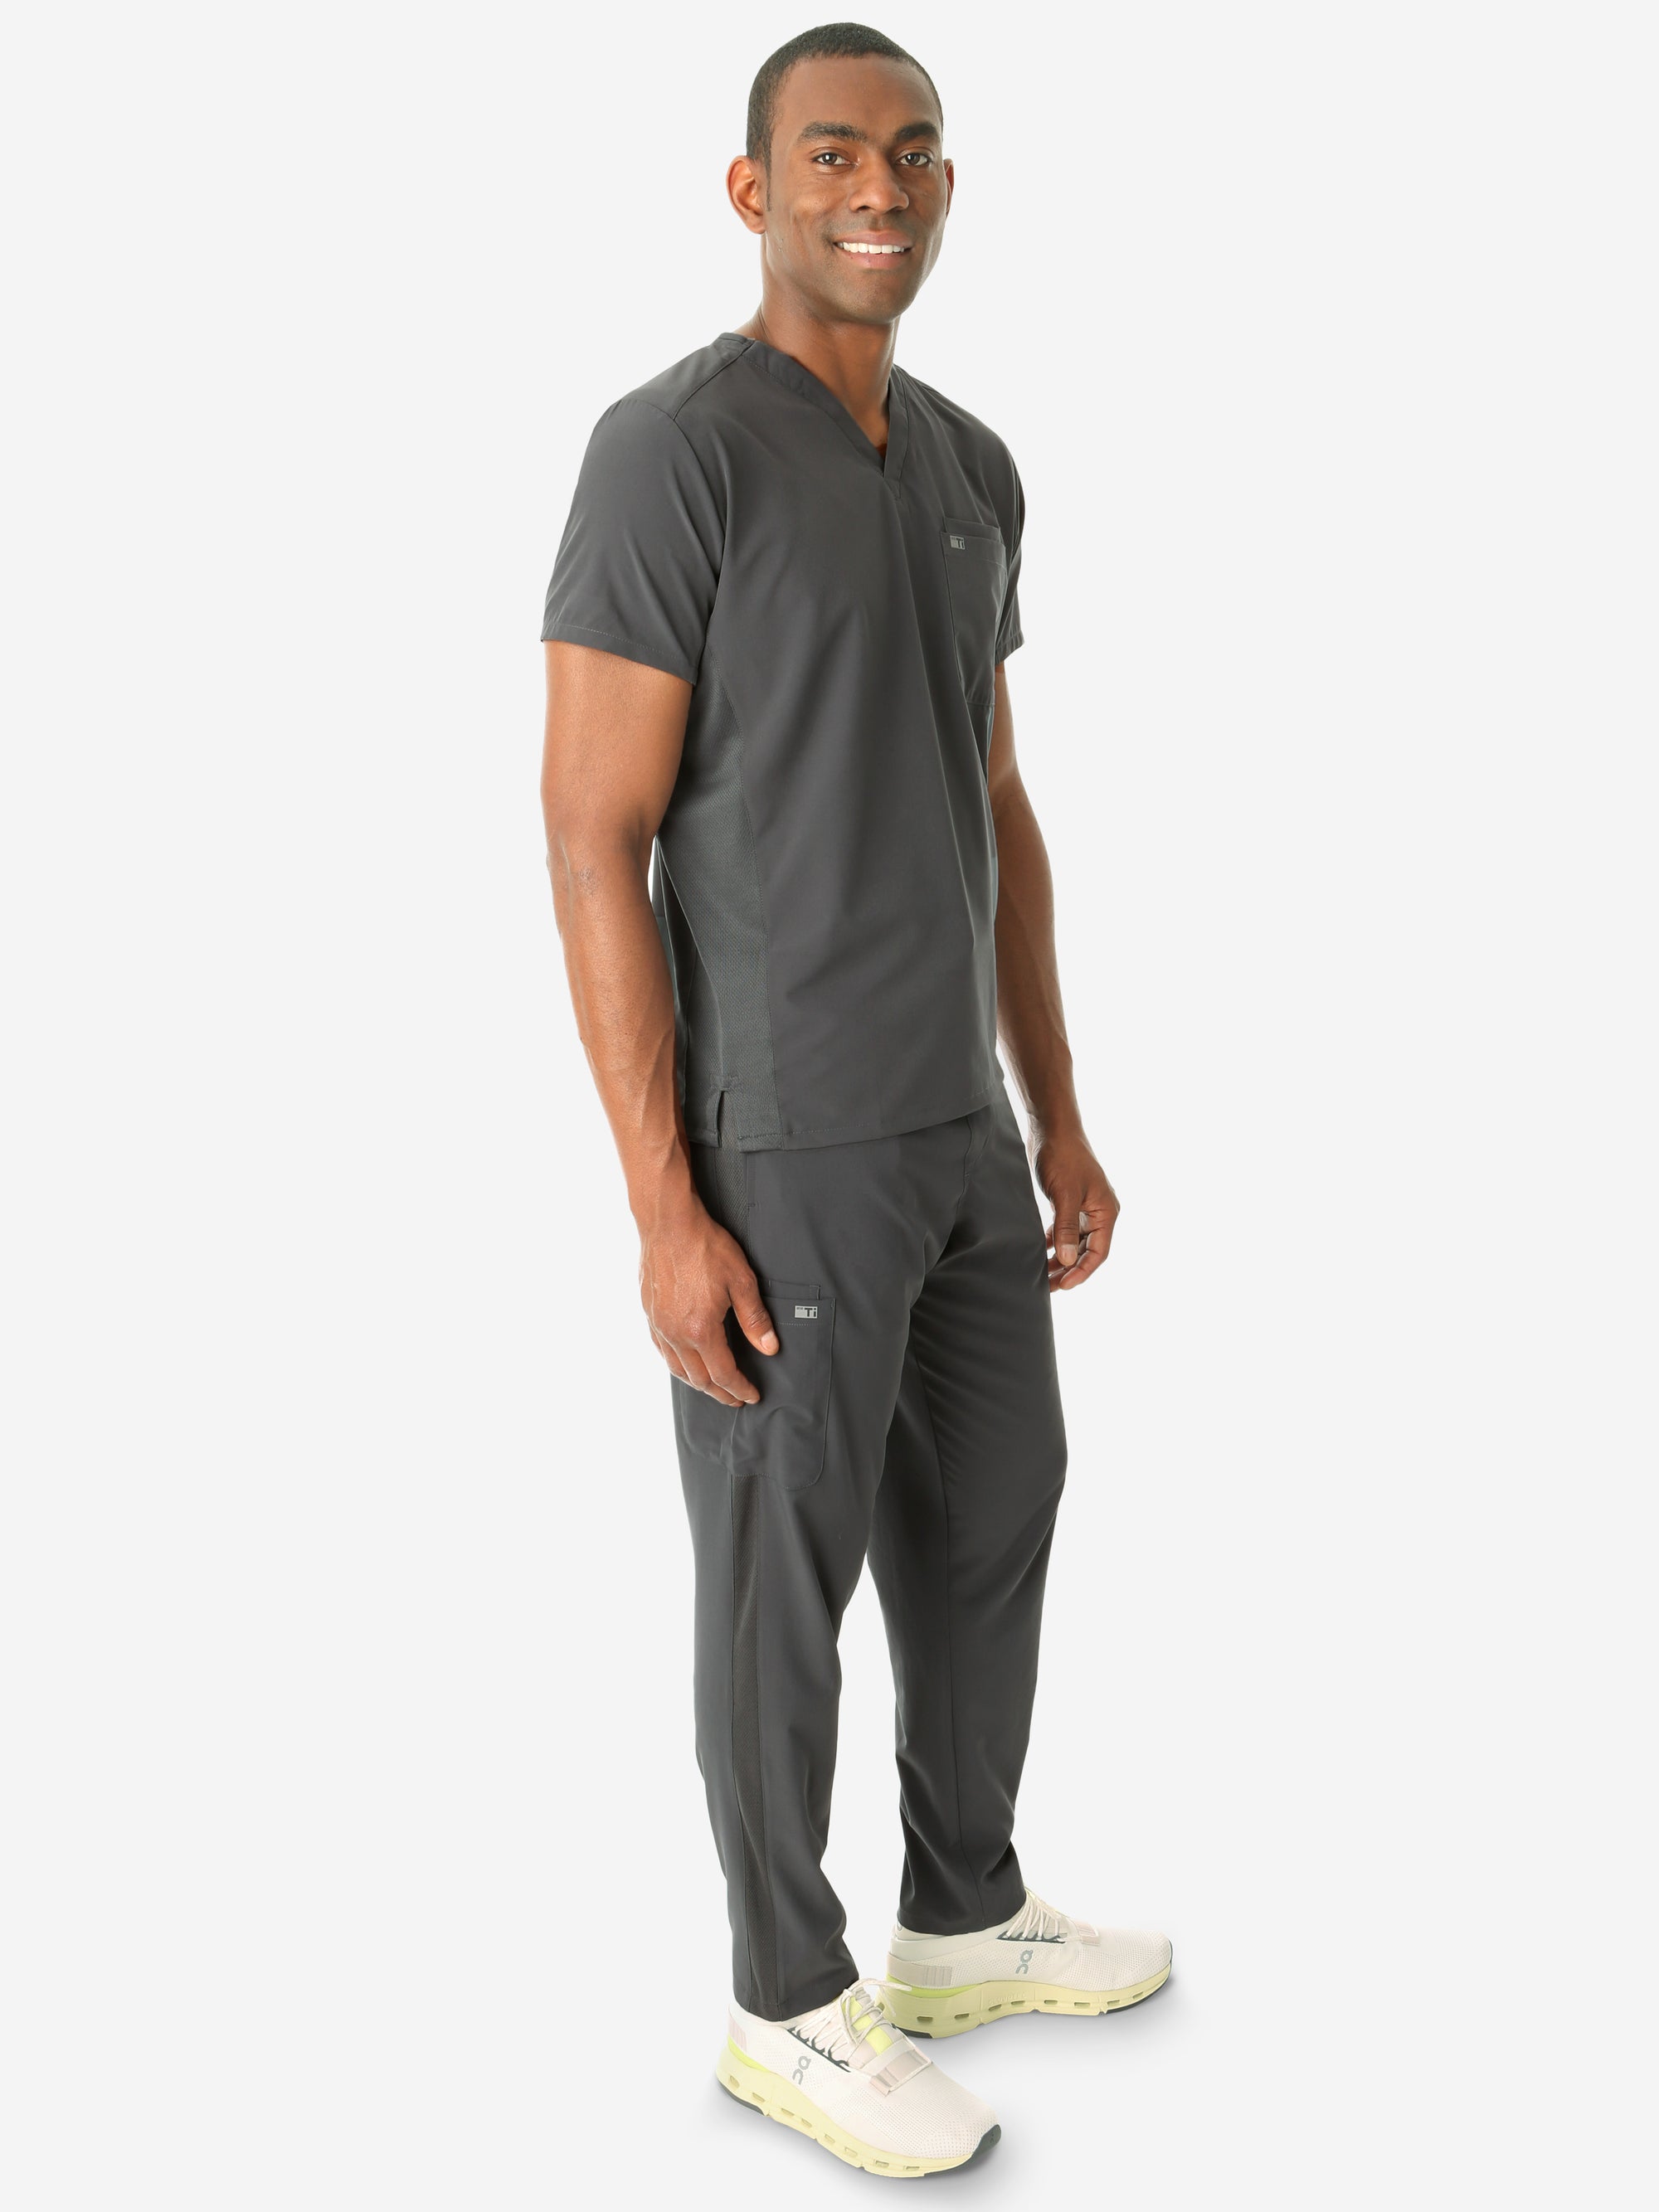 Men&#39;s Double Pocket Scrub Top Untucked Charcoal Gray Full Body Side View with 9-Pocket Pants